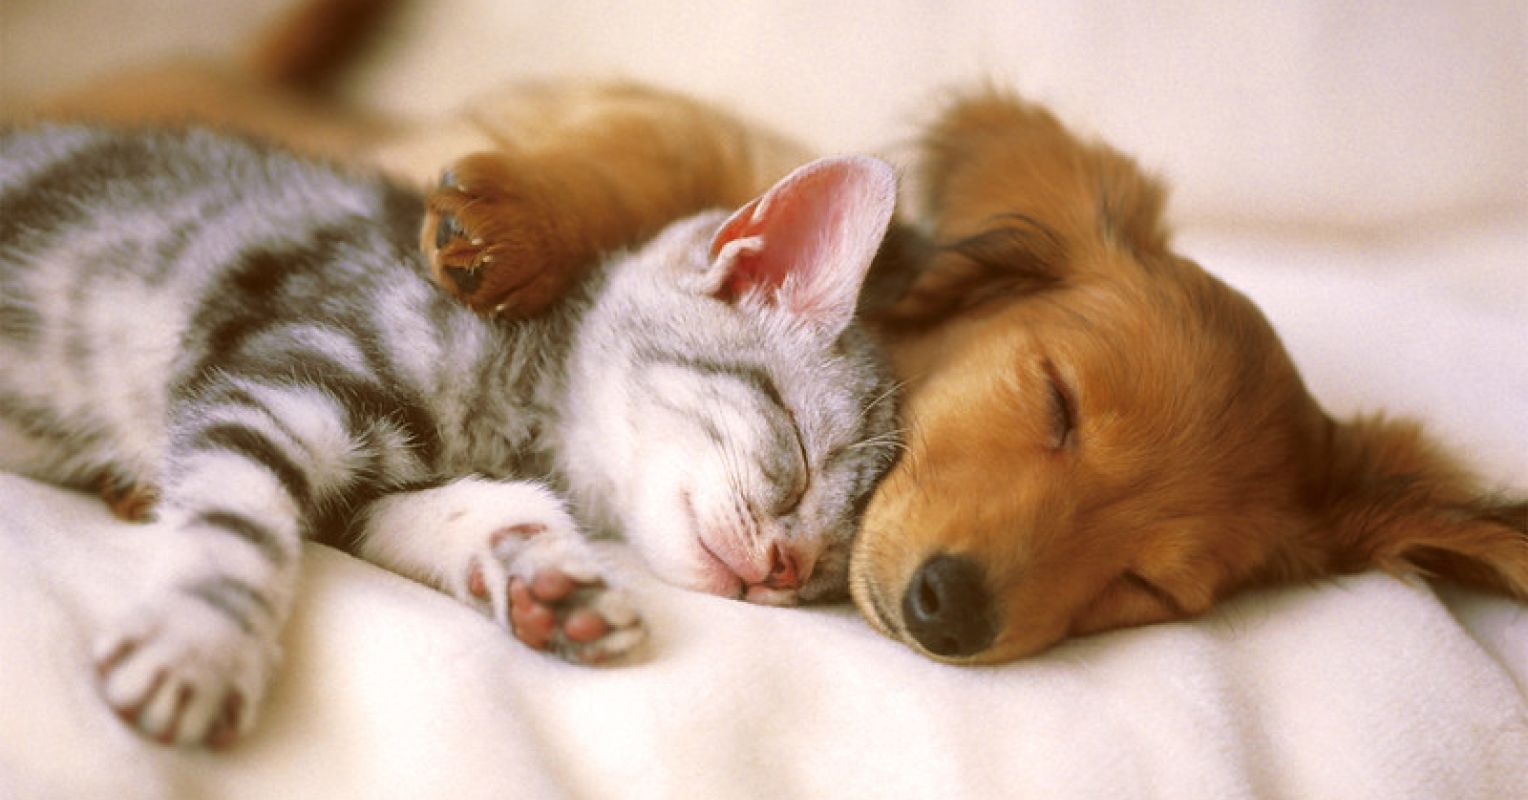 Cat and dog laying together on white bedsheets